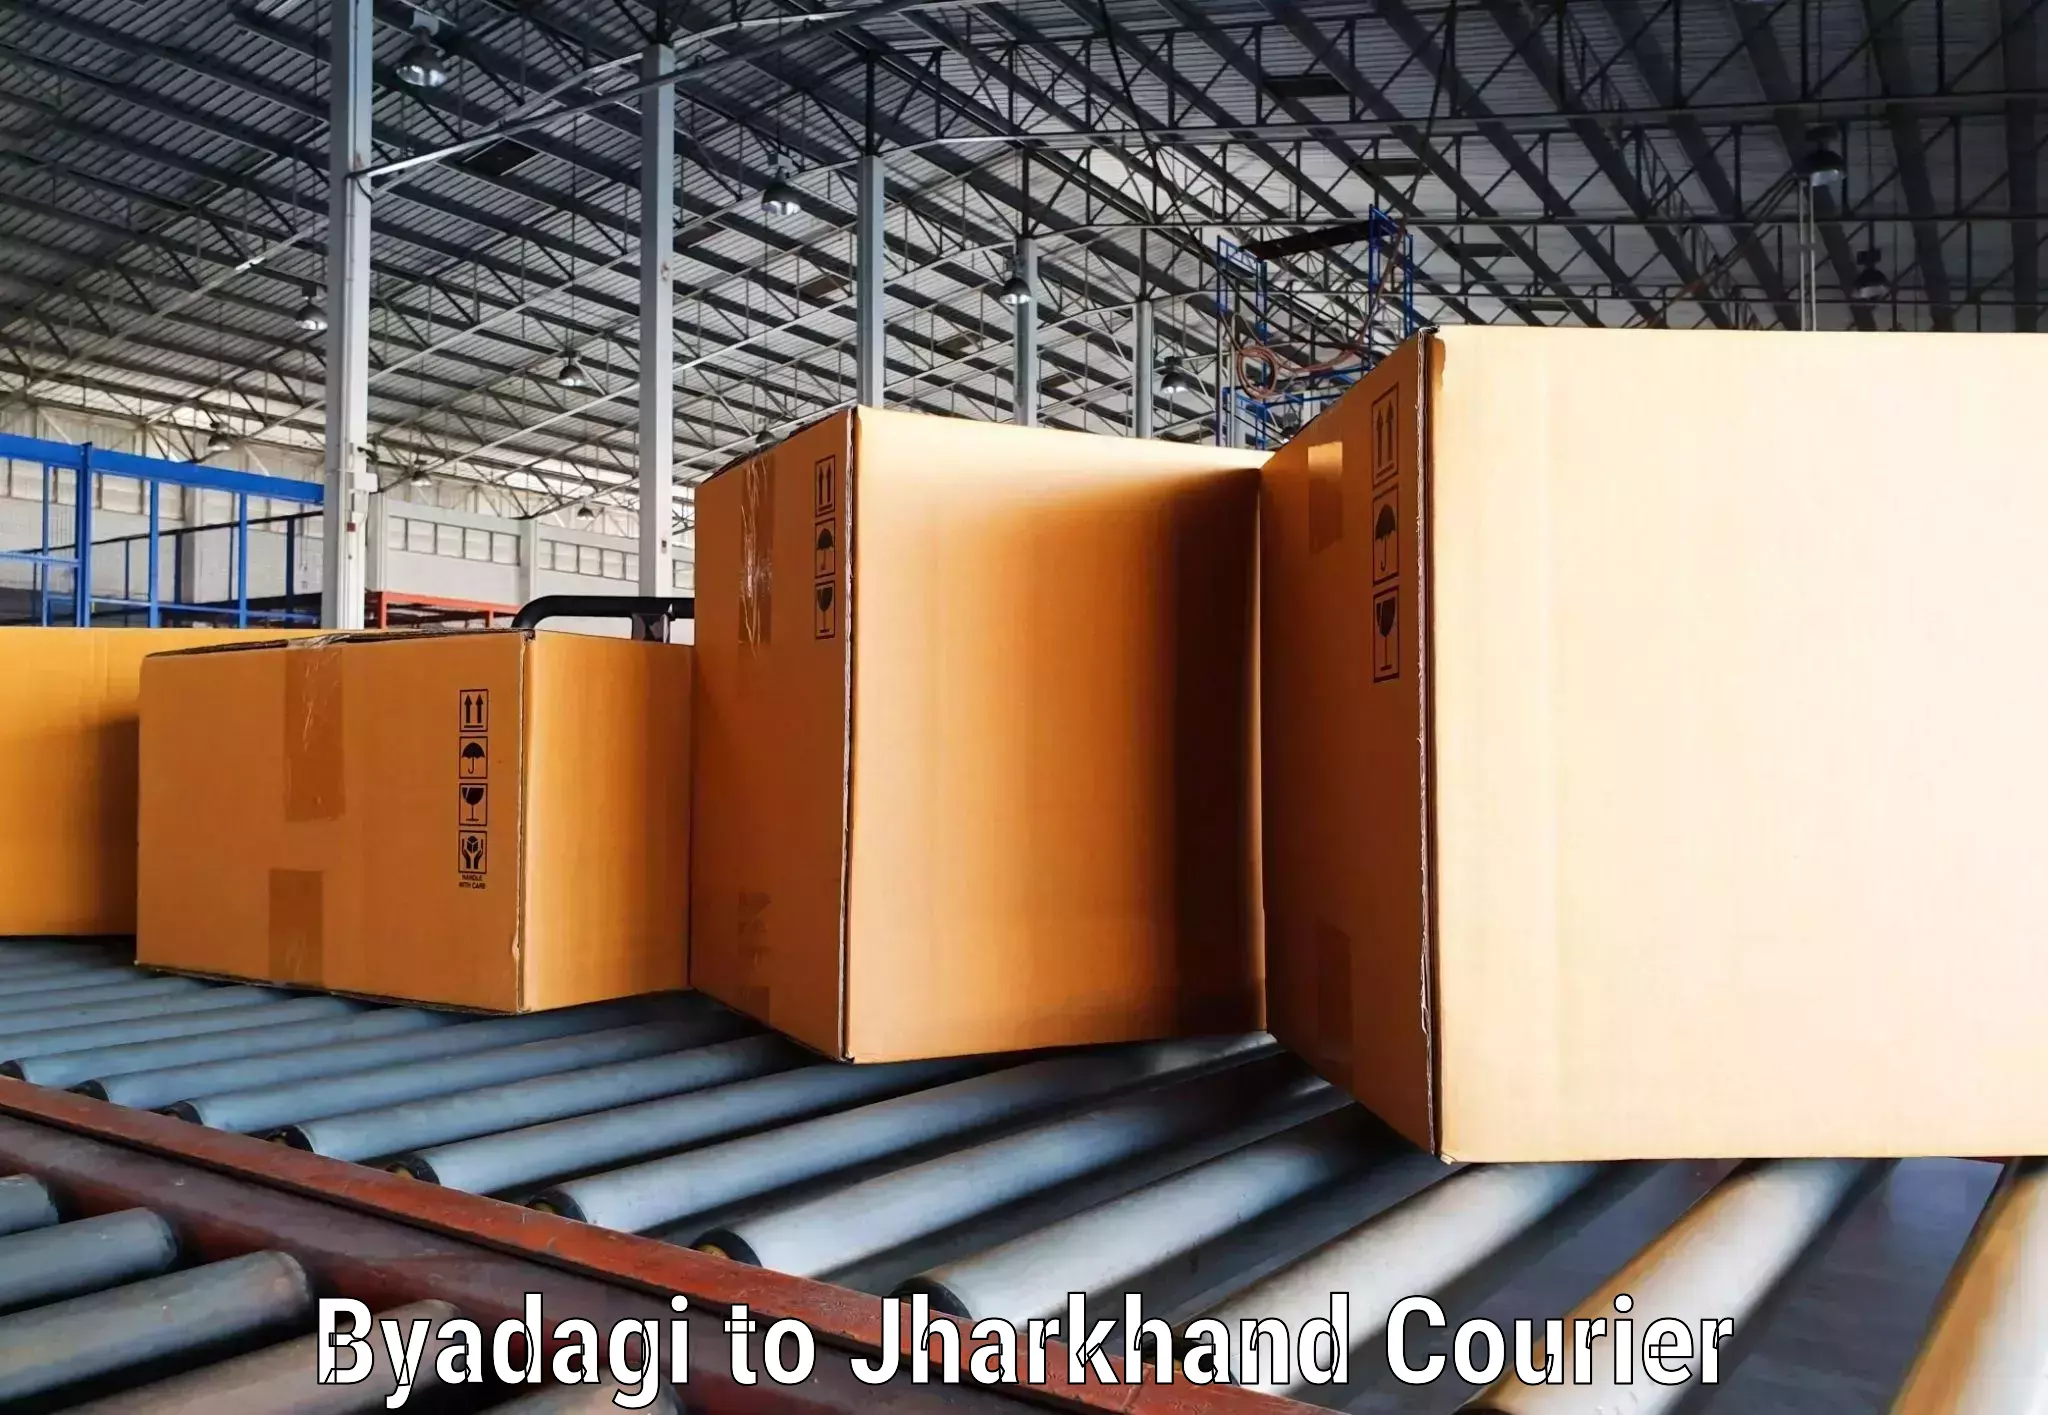 Modern courier technology Byadagi to Dhanbad